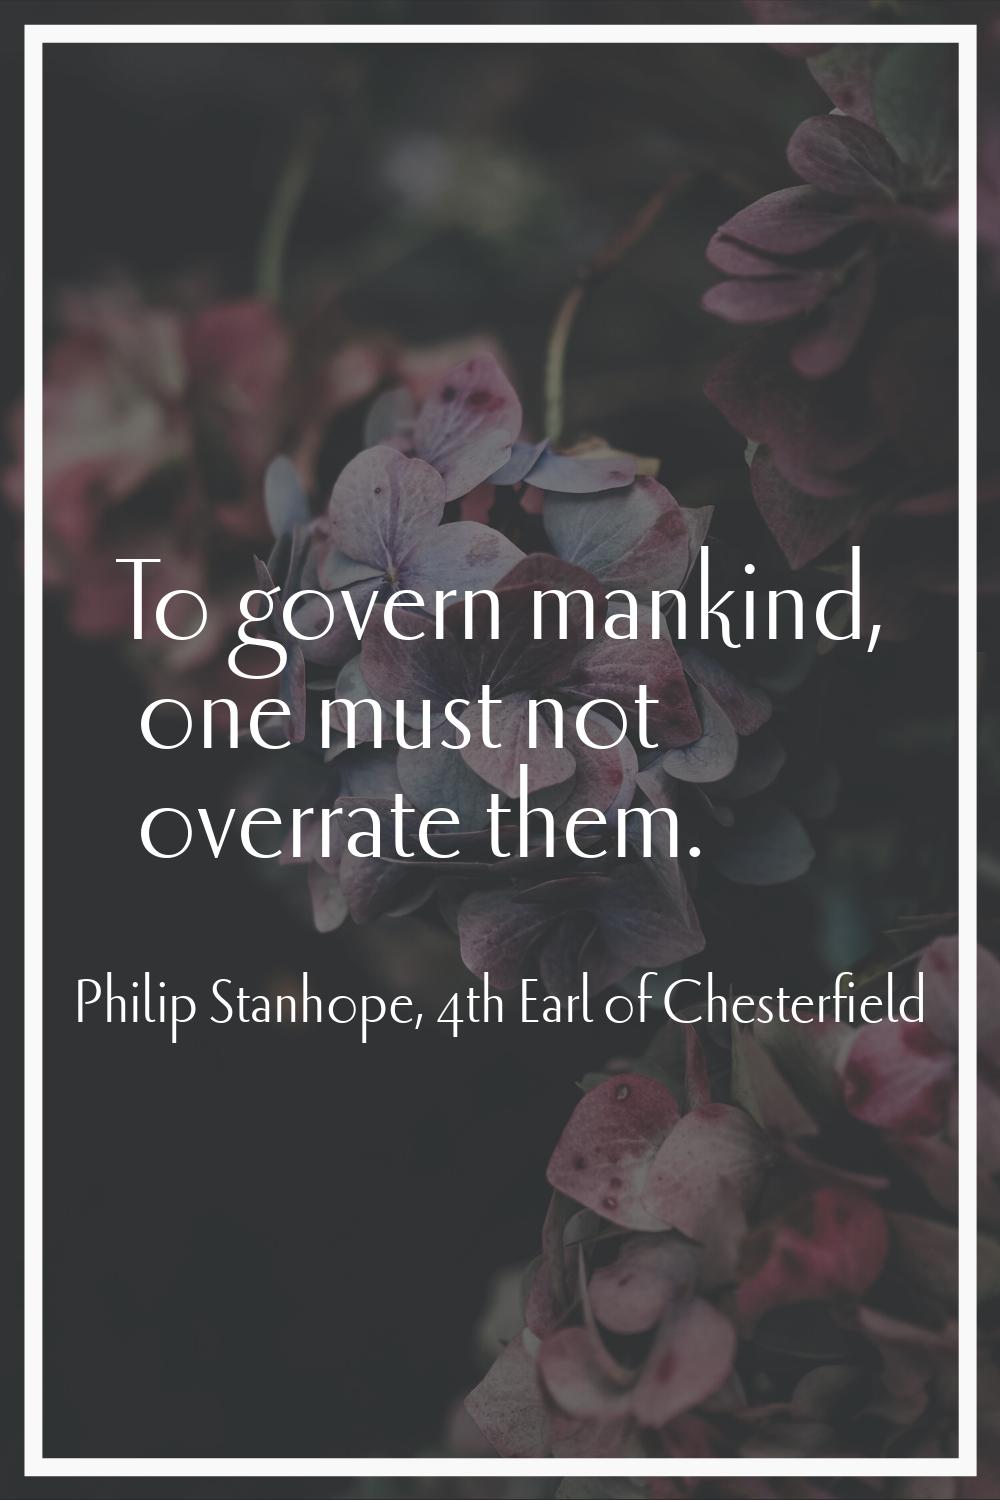 To govern mankind, one must not overrate them.